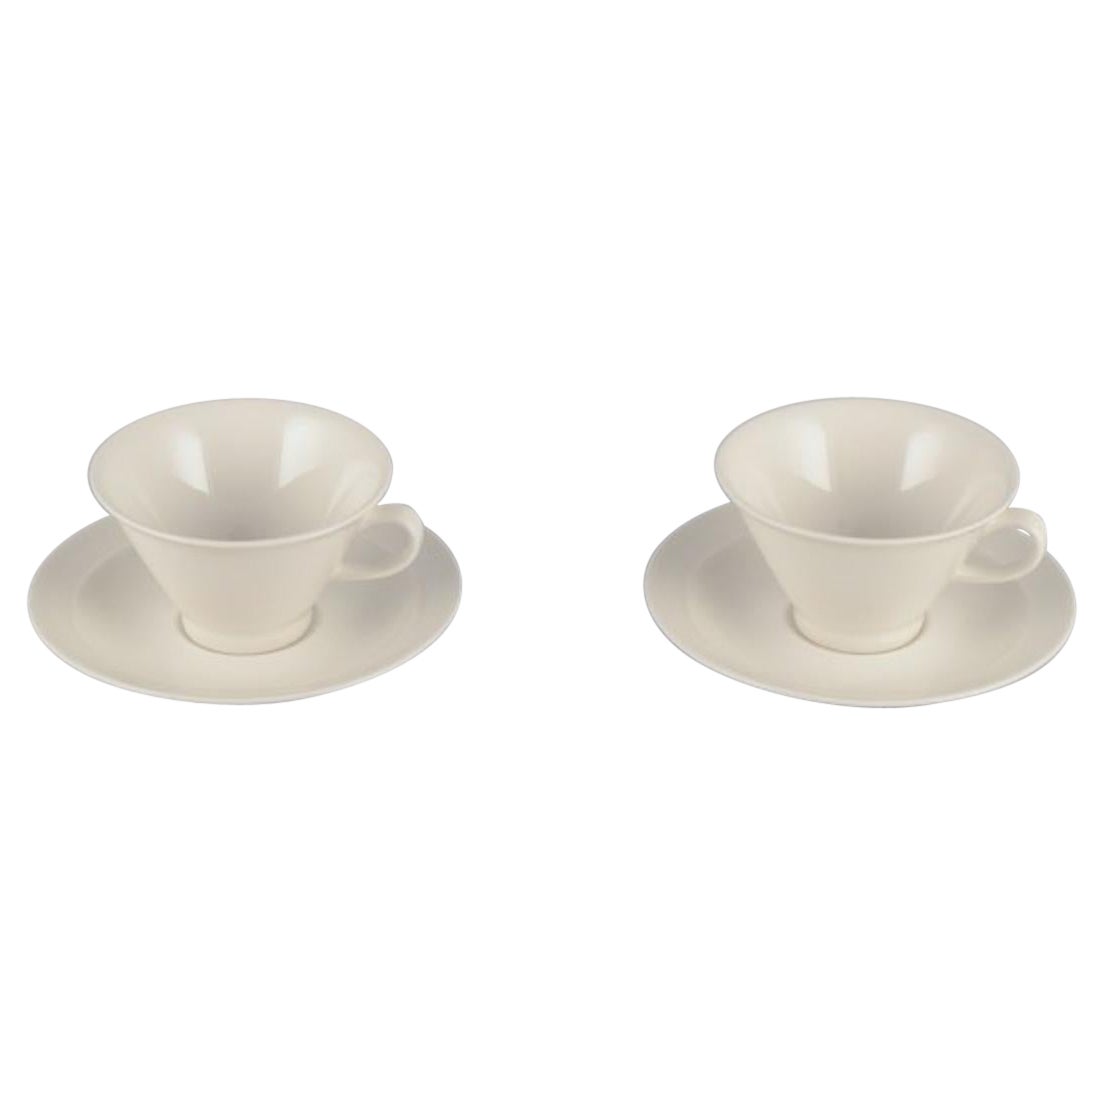 Arabia, Finland, Two sets of "Harlekin" tea cups and saucers in white porcelain. For Sale